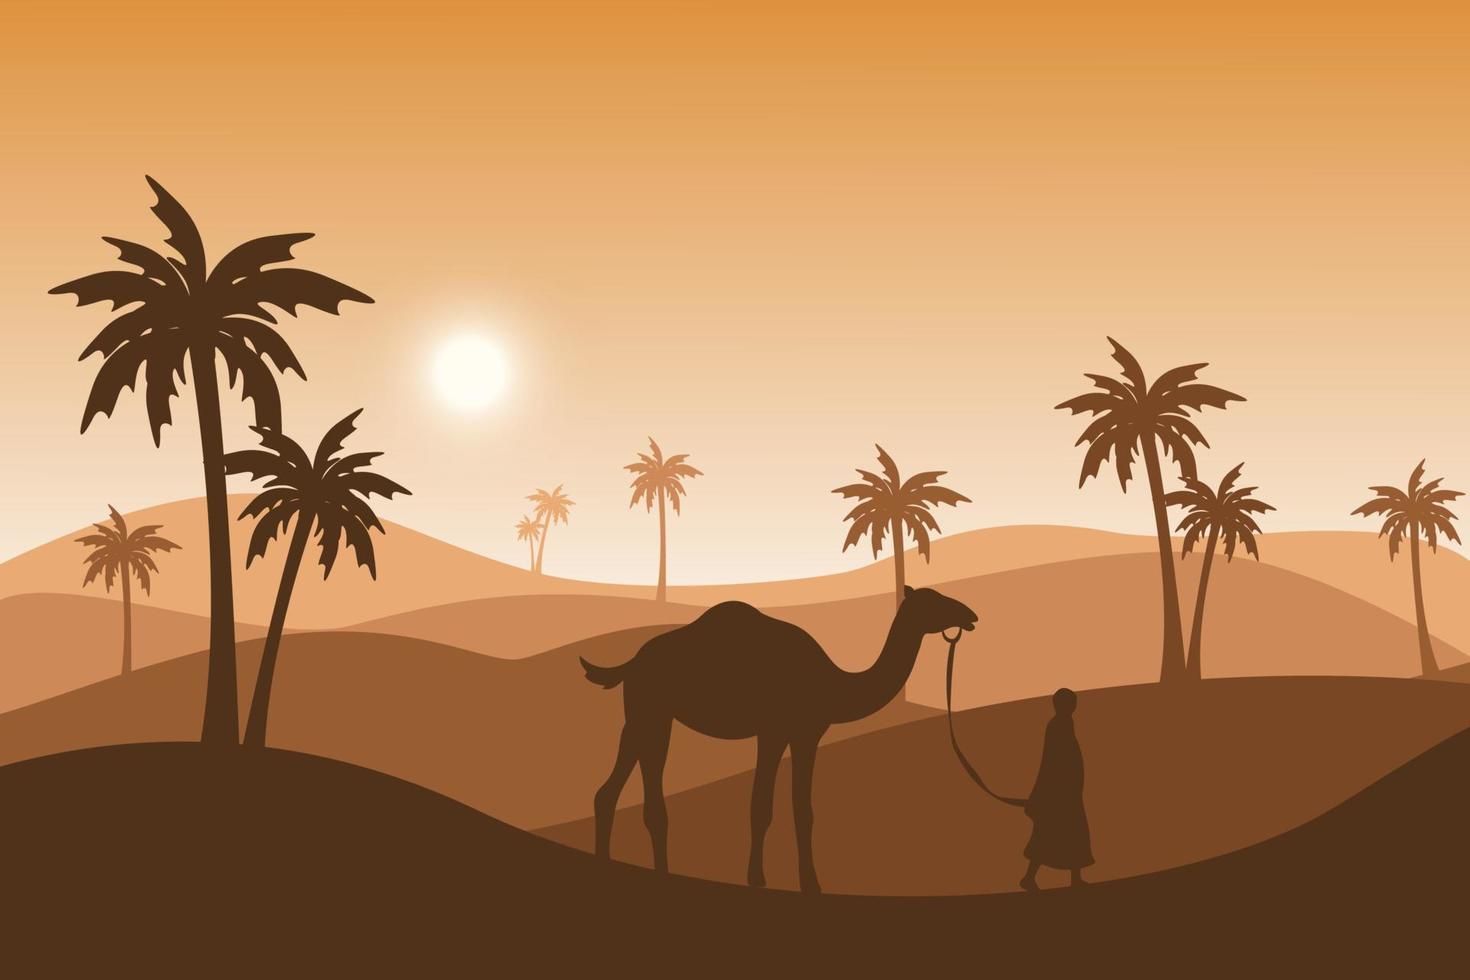 person leading the camel, islamic background illustration wallpaper, eid al adha holiday, beautiful sunlight silhouette landscape, palm tree, sand desert, vector graphic